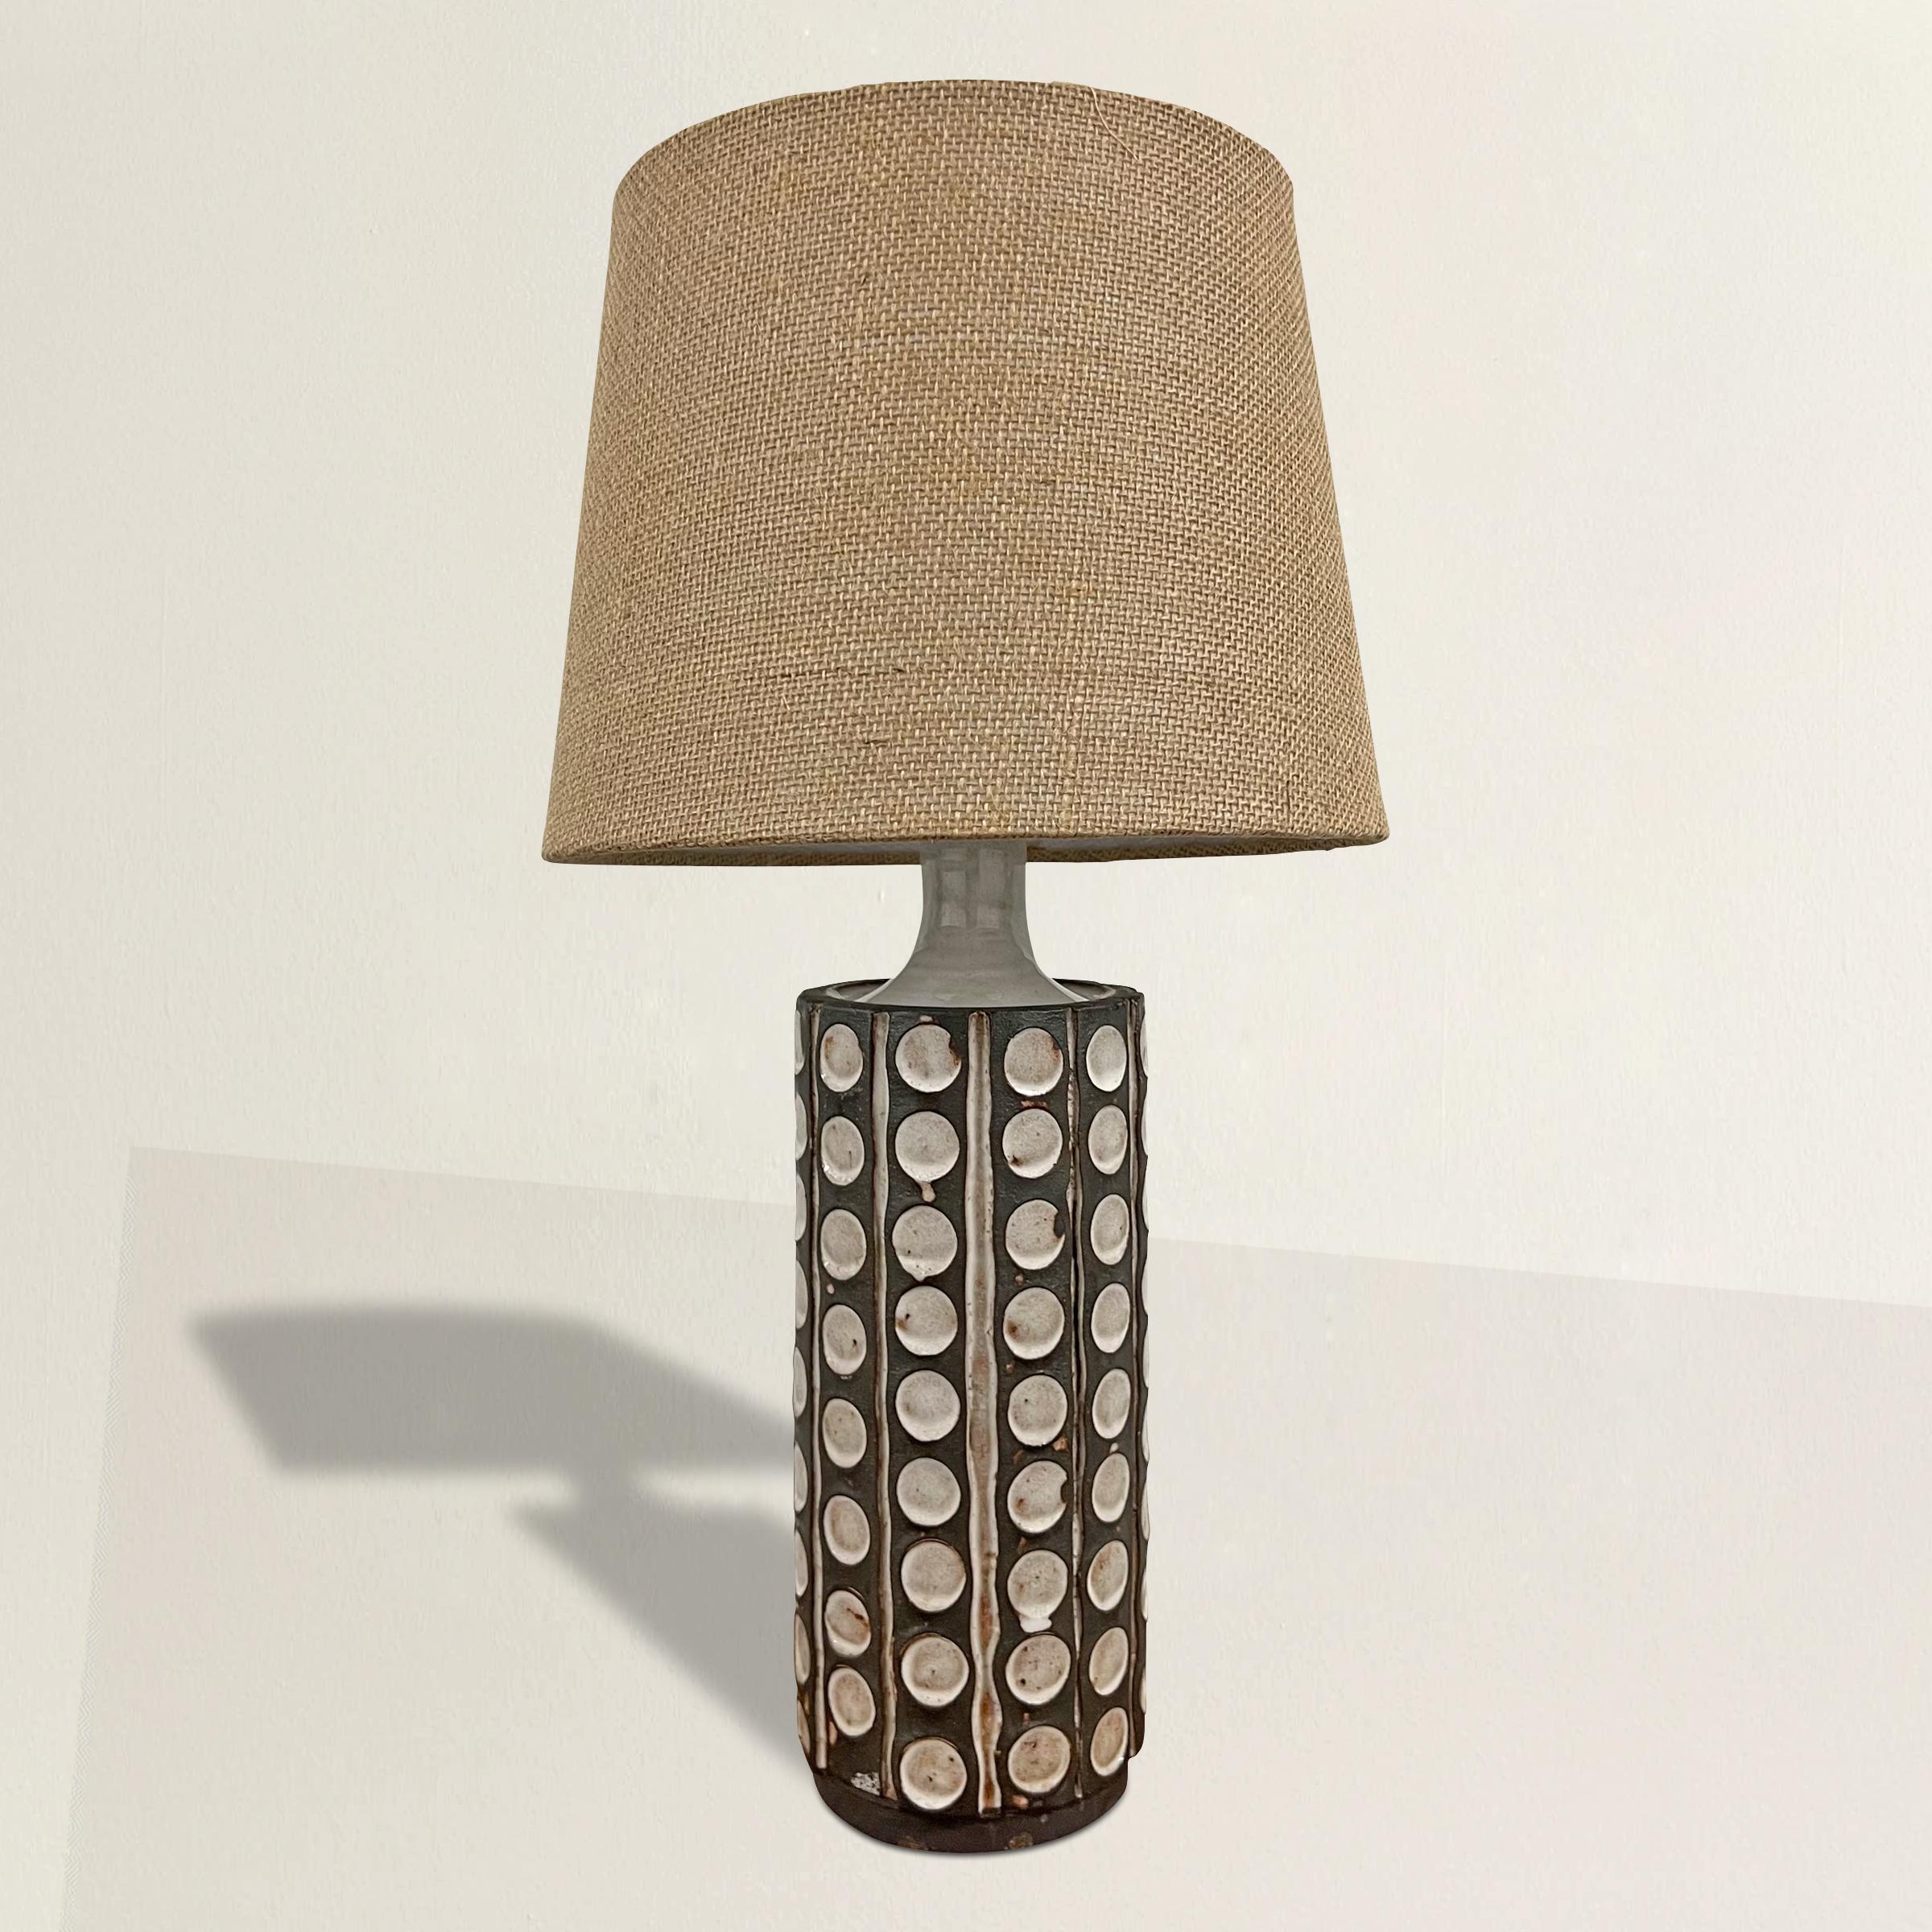 Illuminate your space with the understated elegance of mid-20th century Danish modern design embodied in this ceramic table lamp. Its cylindrical form showcases the unglazed clay against a striking white glaze pattern of repeated stamped circles and